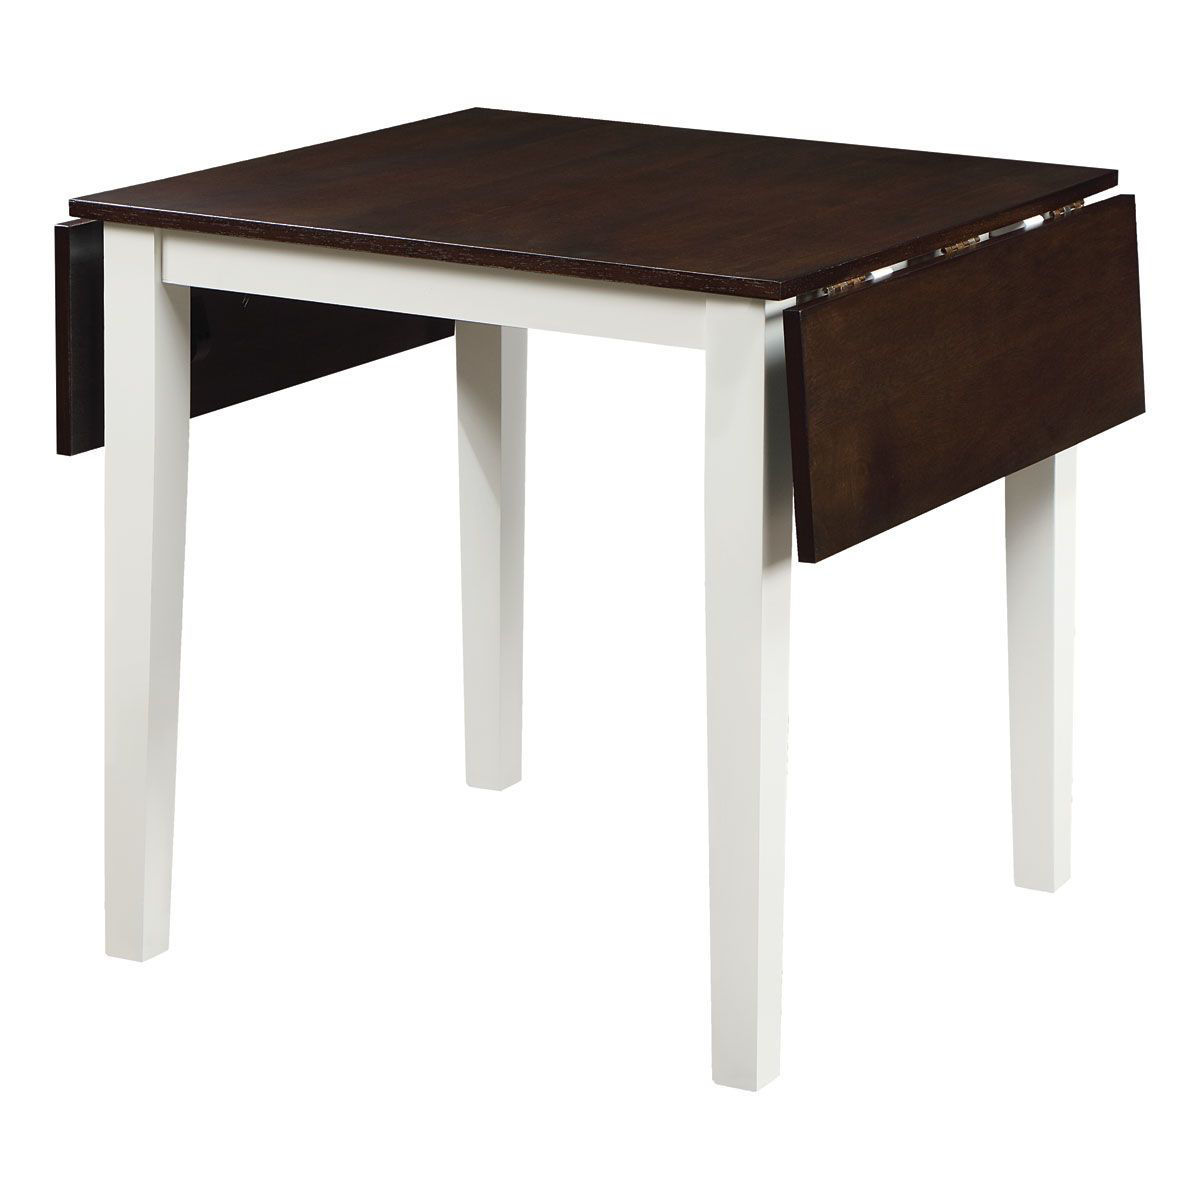 Louie Drop Leaf Dining Table Badcock Home Furniture Andmore